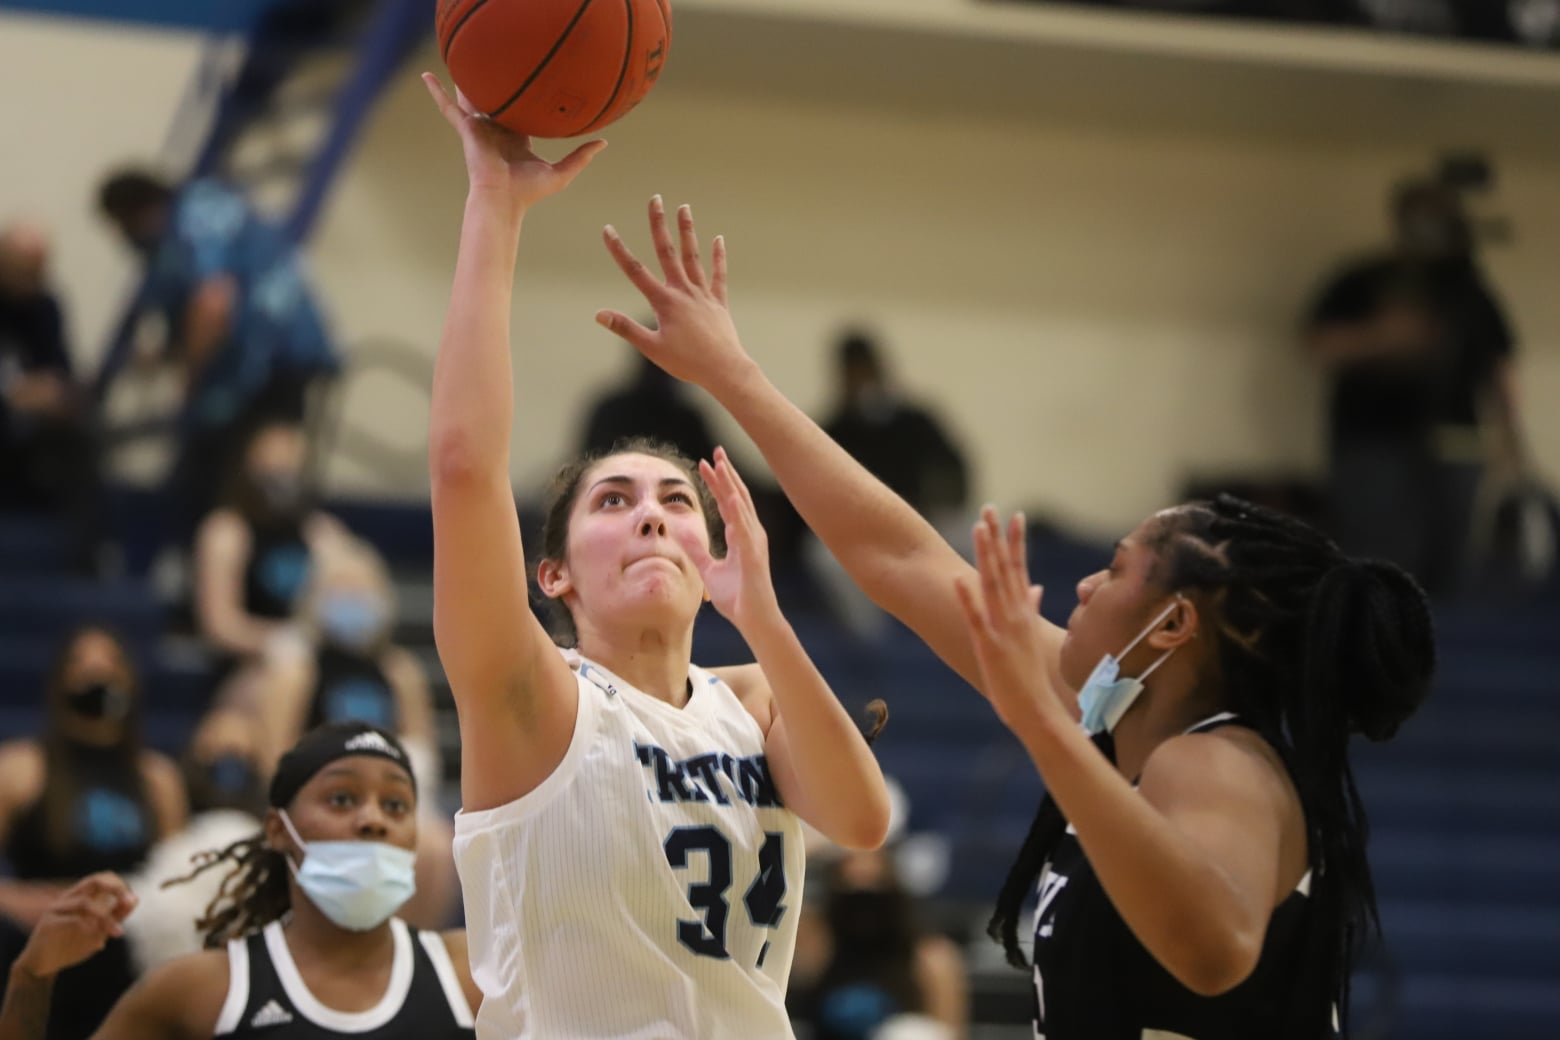 Galloway, West pace Tritons to road win